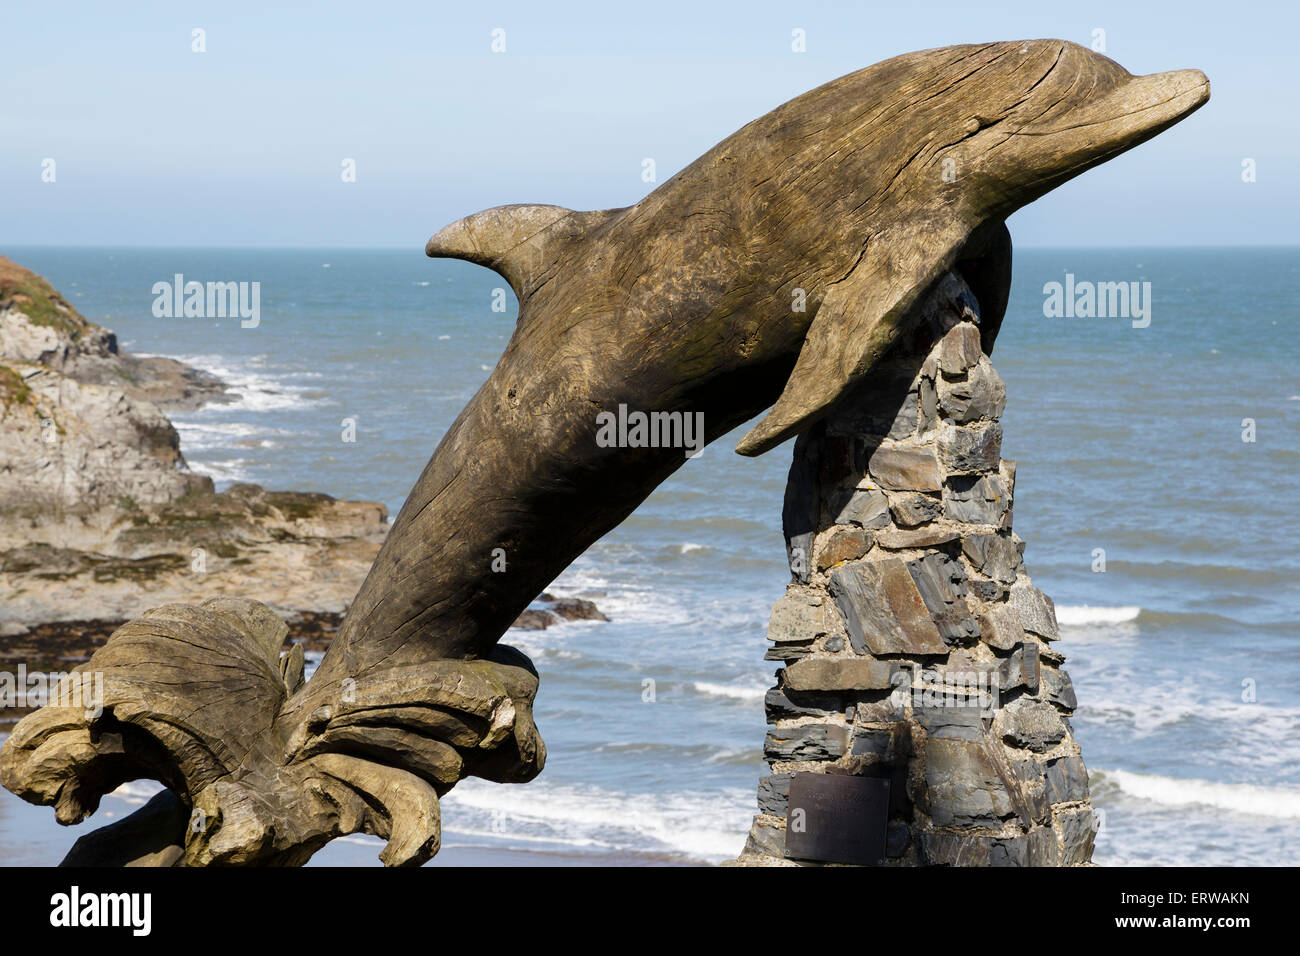 Leaping dolphin sculpture, Aberporth, Ceredigion, Wales Stock Photo